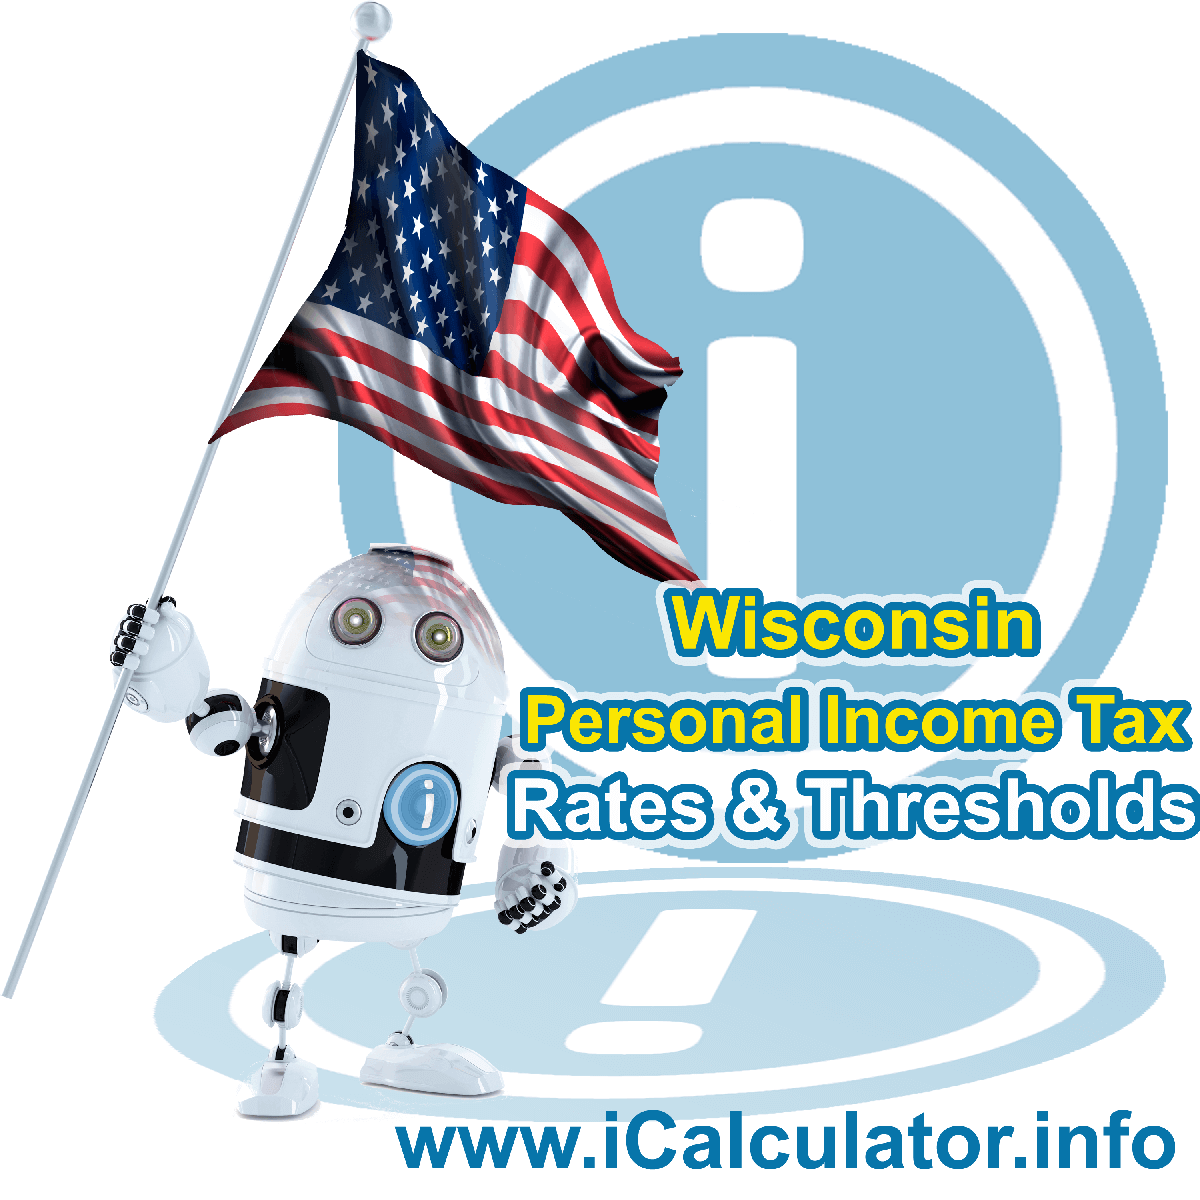 Wisconsin State Tax Tables 2016. This image displays details of the Wisconsin State Tax Tables for the 2016 tax return year which is provided in support of the 2016 US Tax Calculator